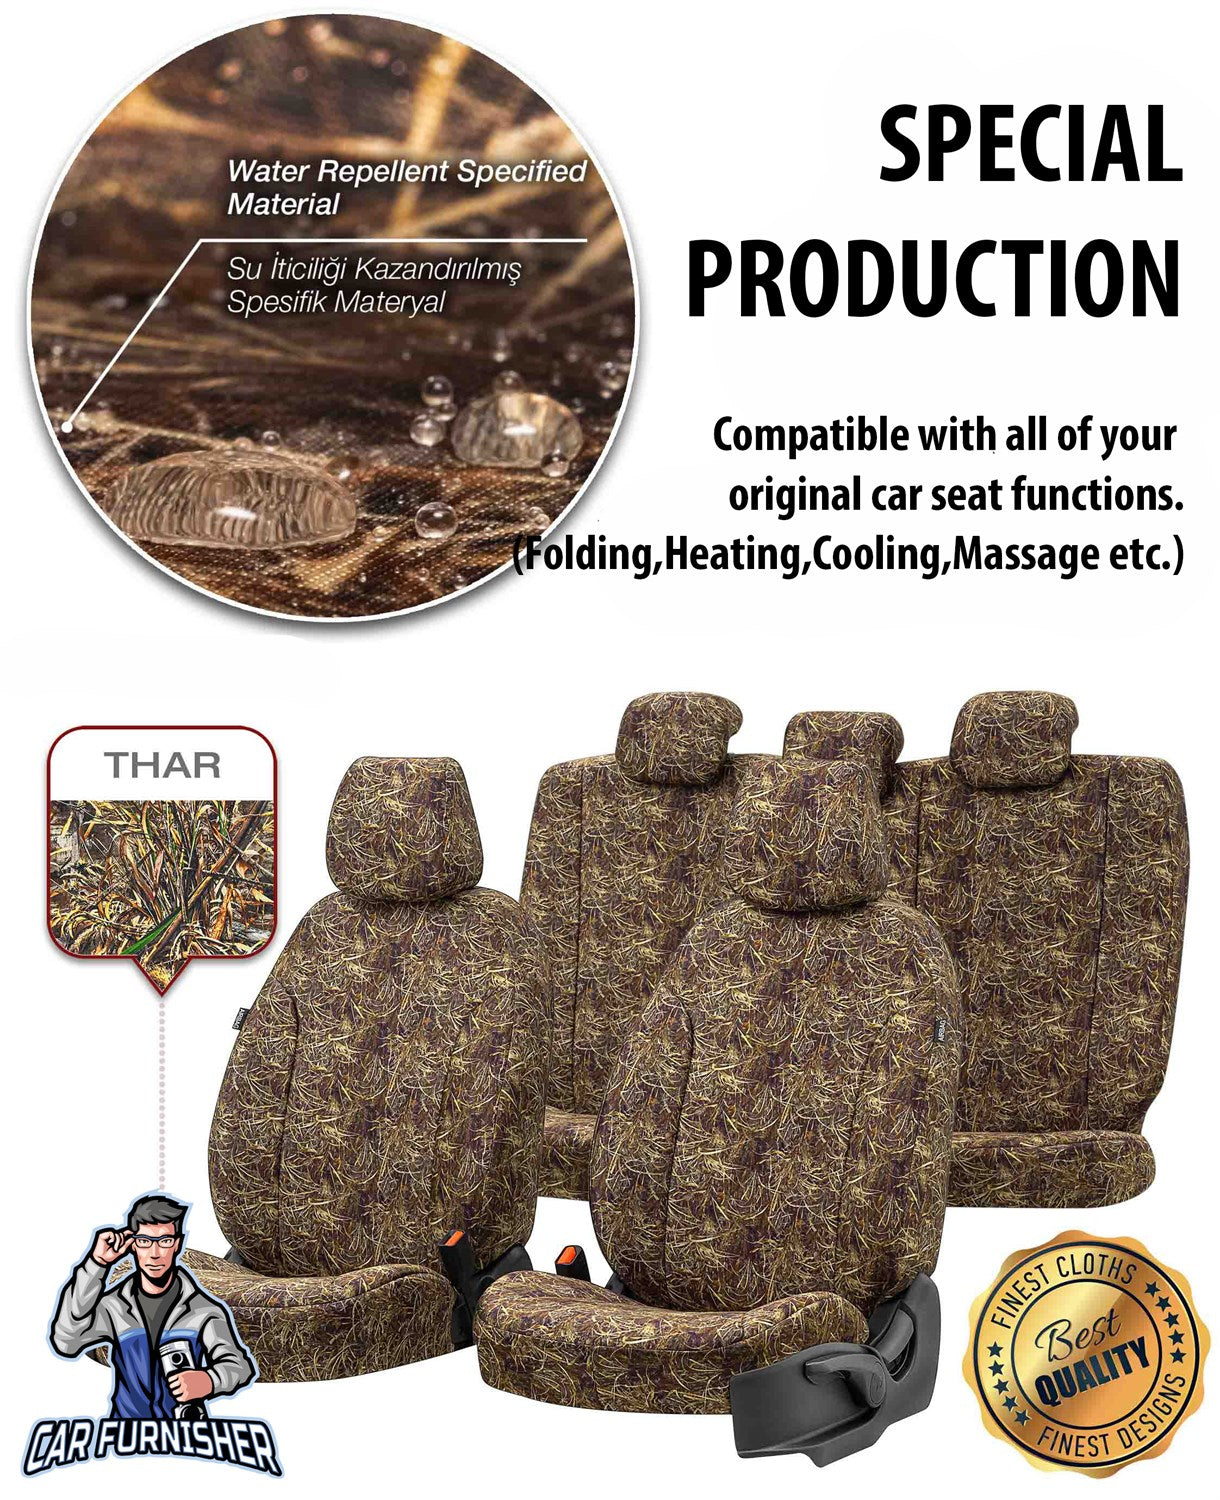 Volvo V70 Seat Cover Camouflage Waterproof Design Thar Camo Waterproof Fabric